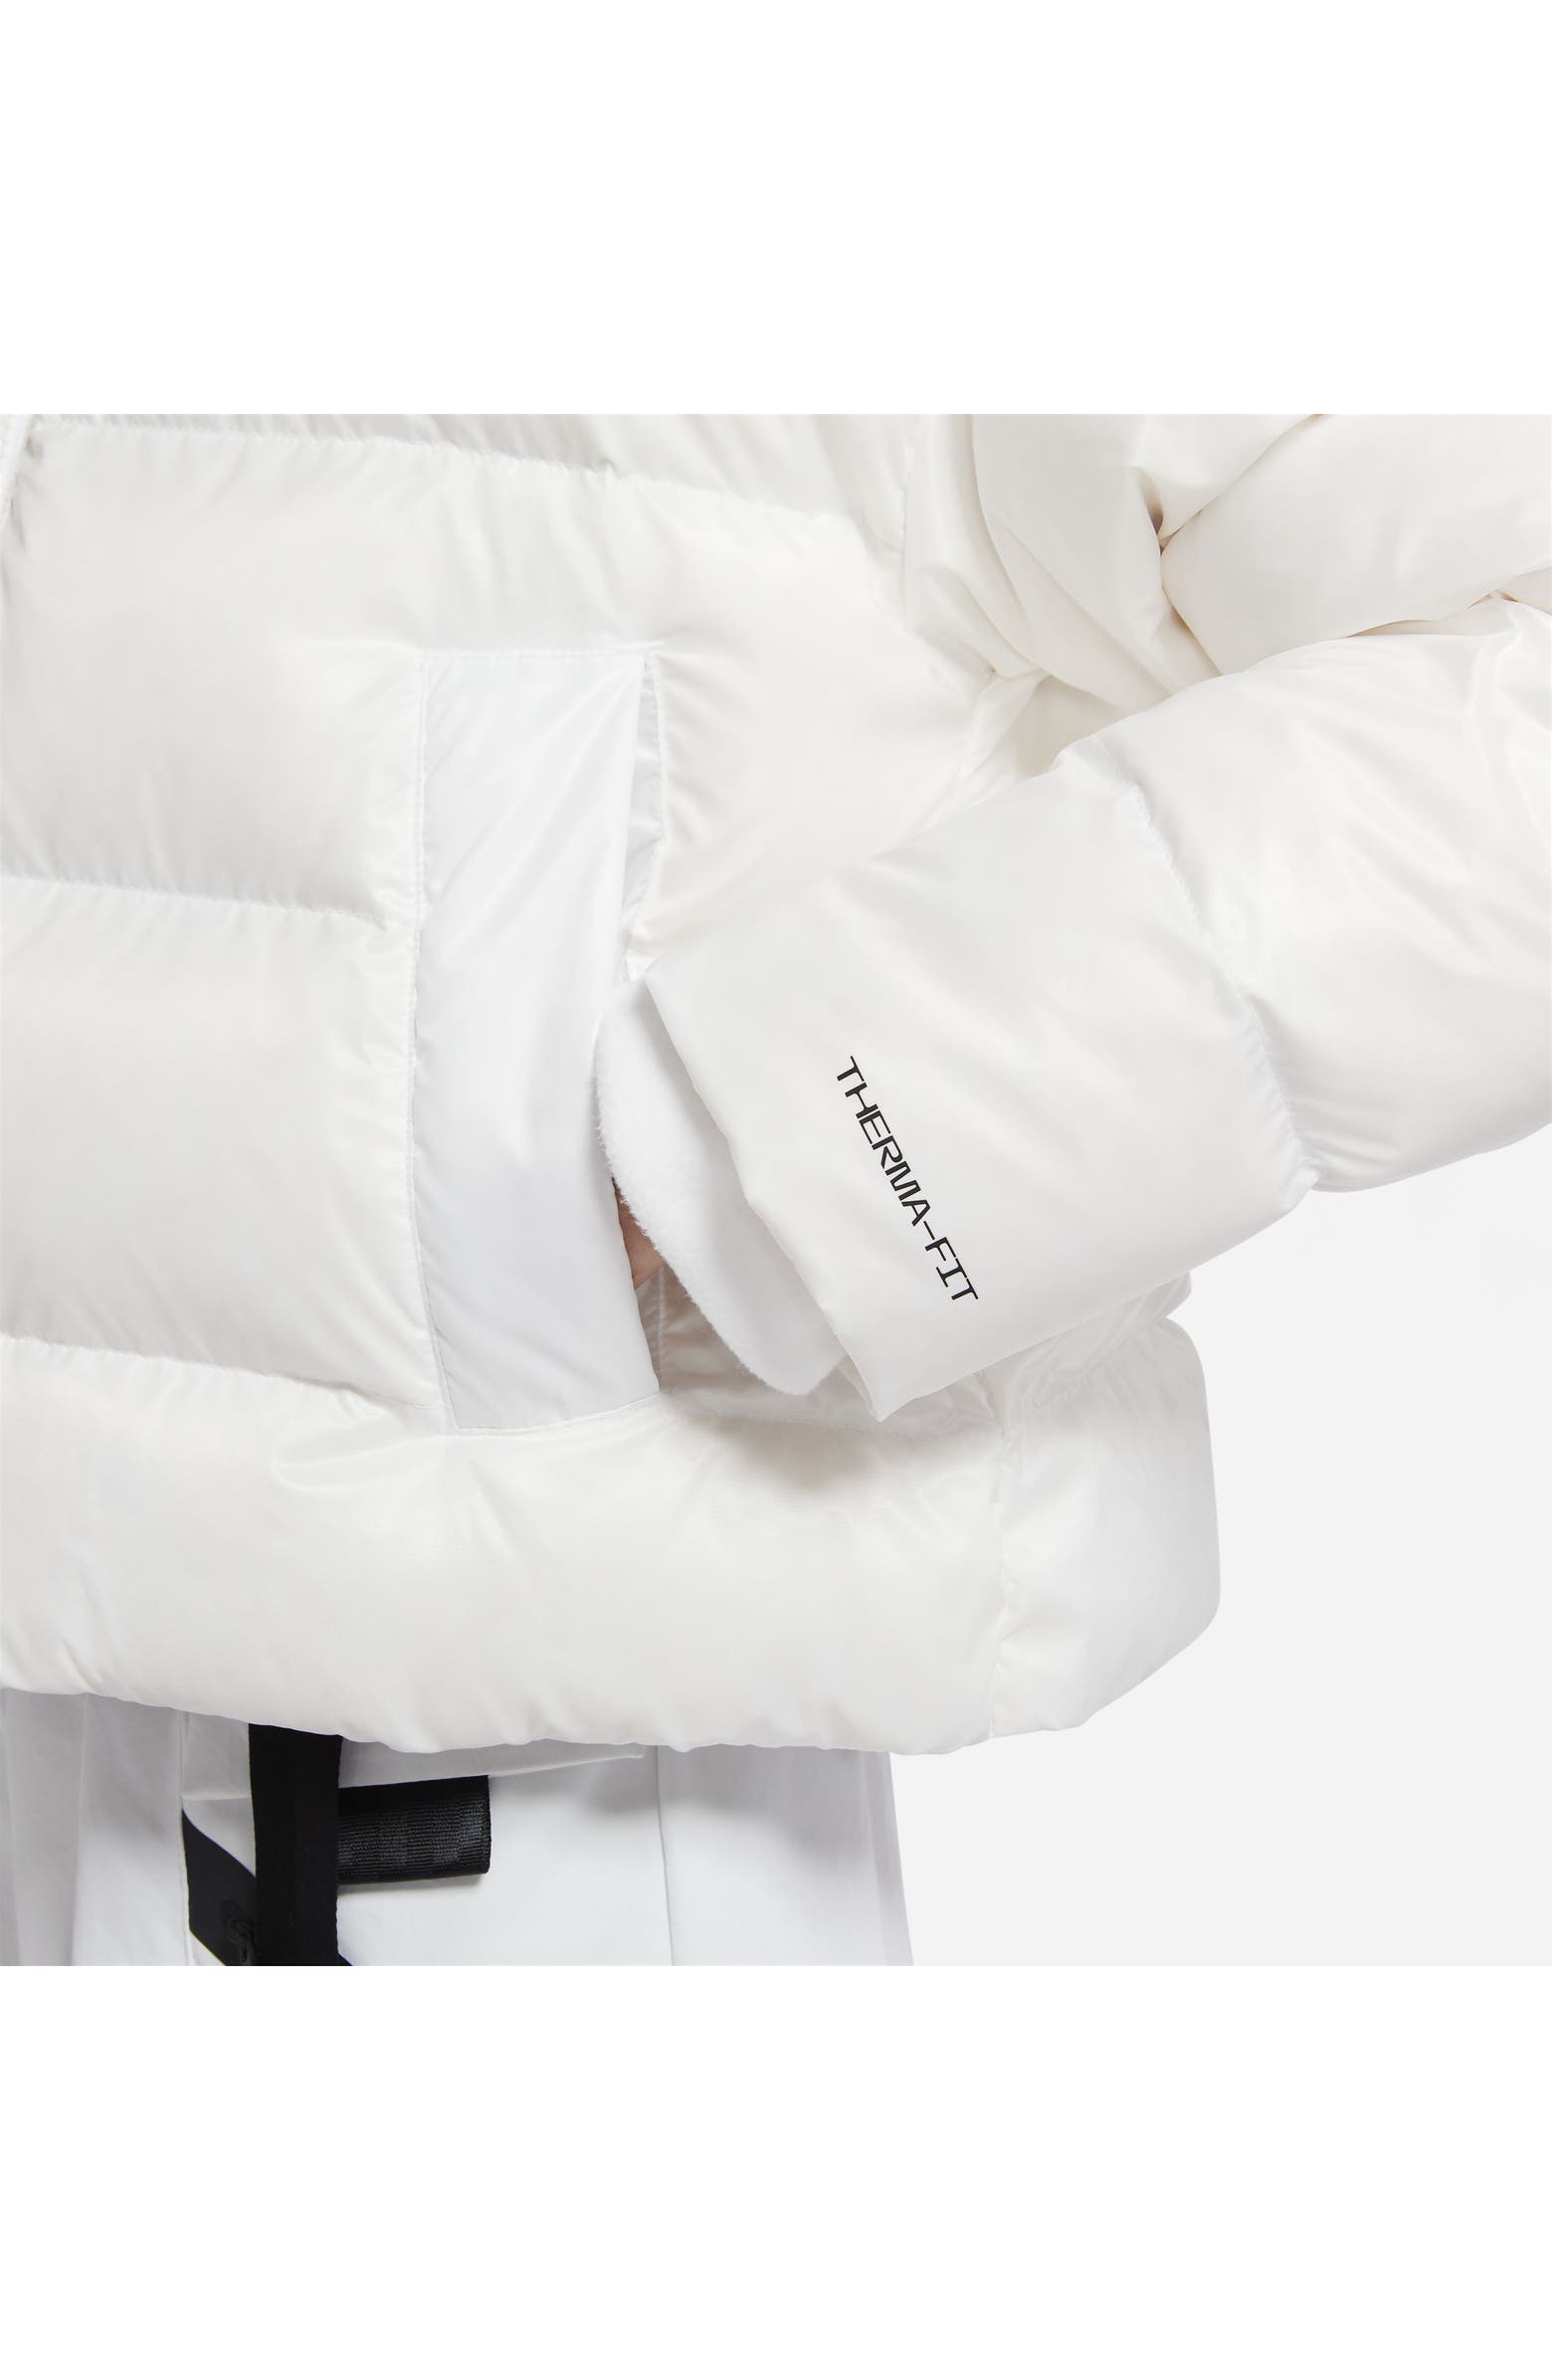 Nike Sportswear City Therma-FIT Down Puffer Jacket | Nordstrom